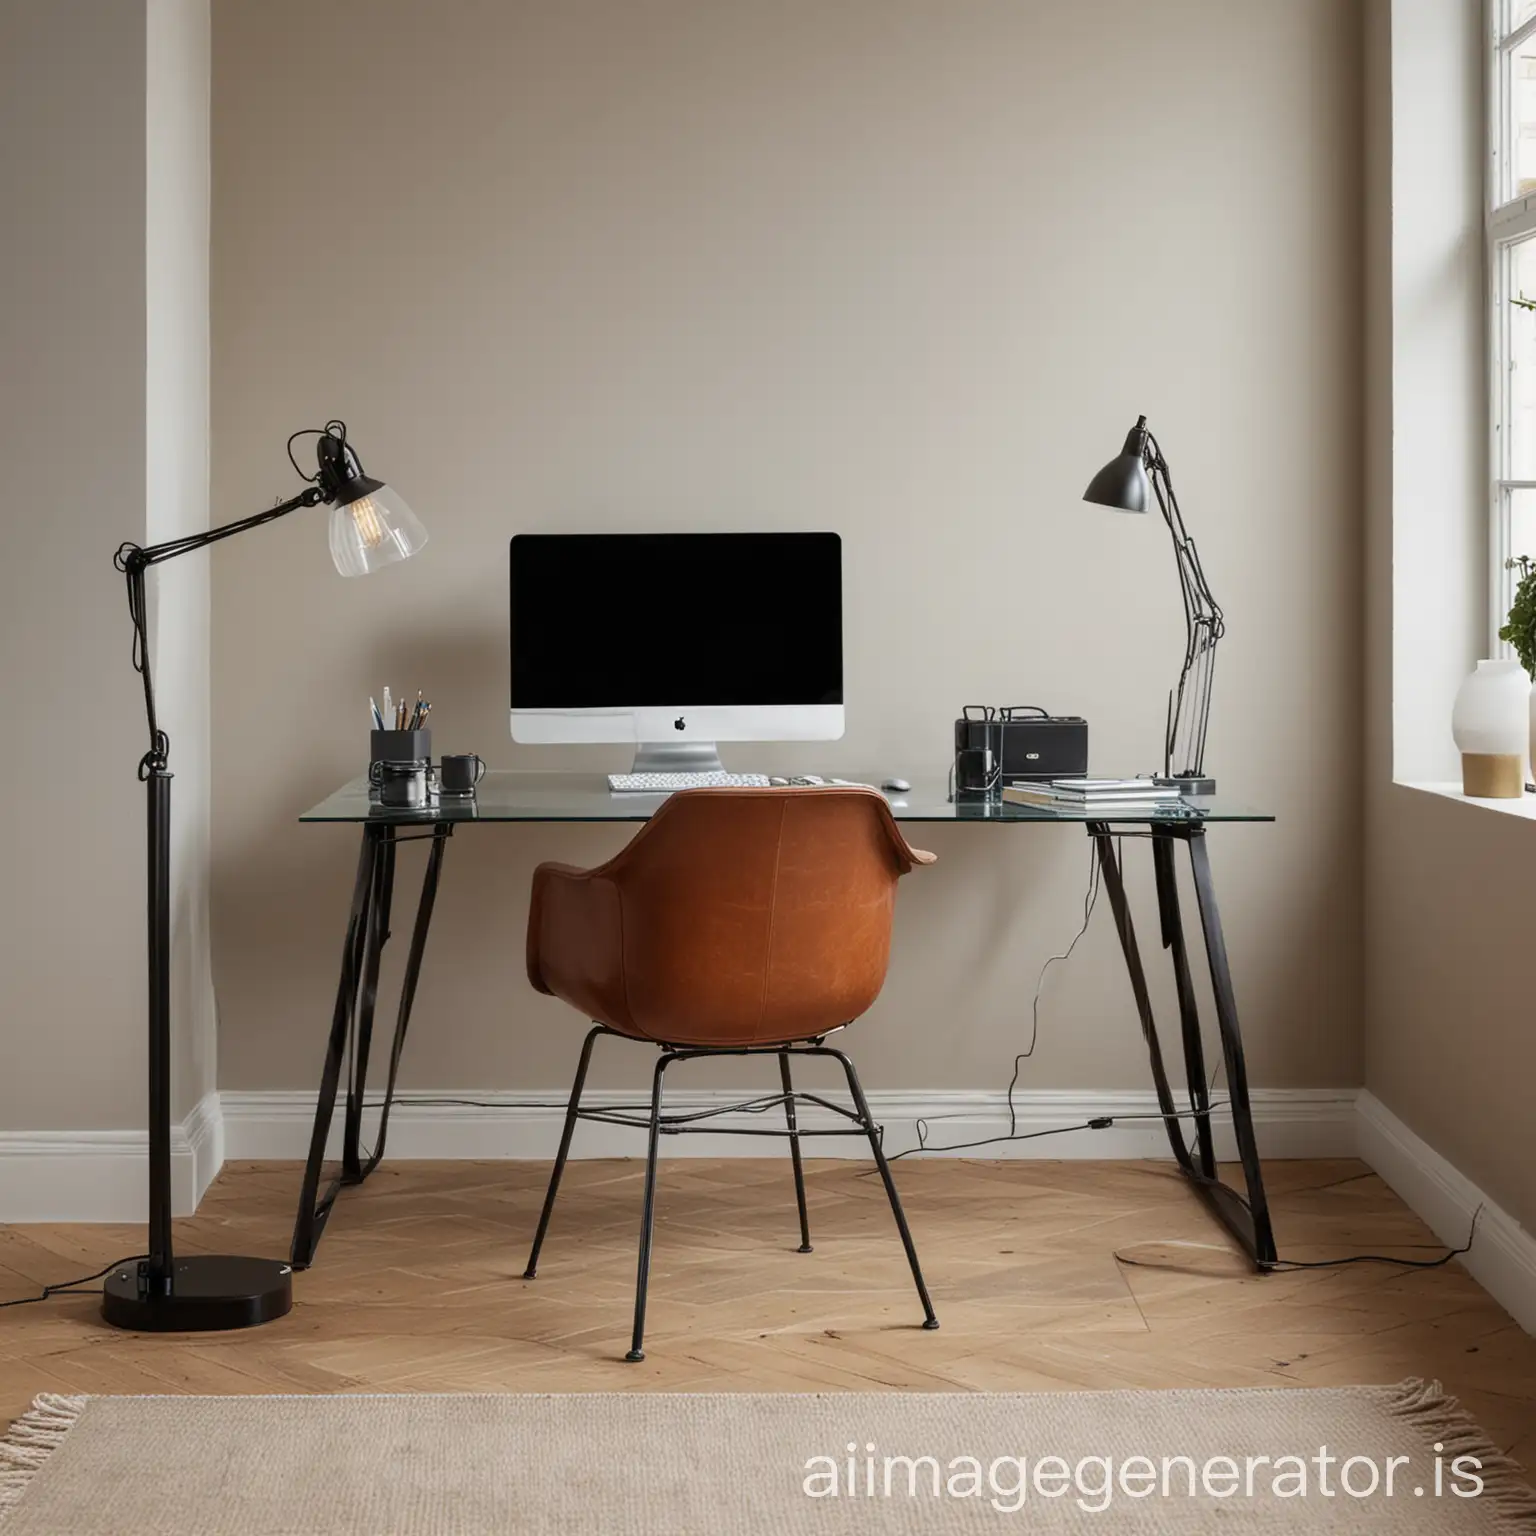 Glass home office desk with computer, standing lamp, leather chair to side against large blank wall